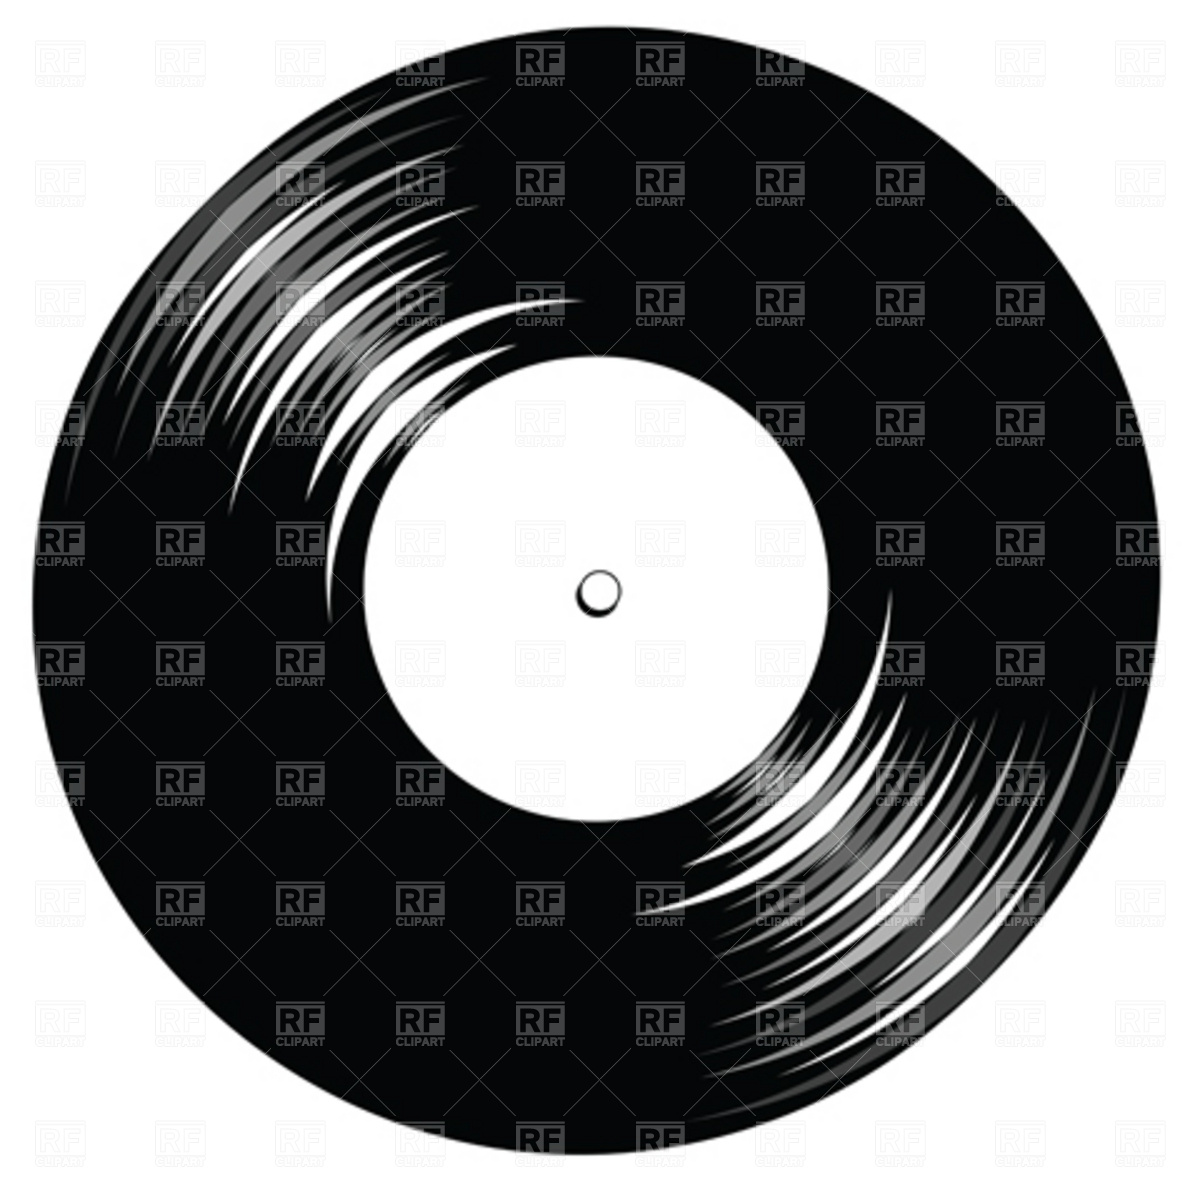 Gramophone record clipart - Clipground